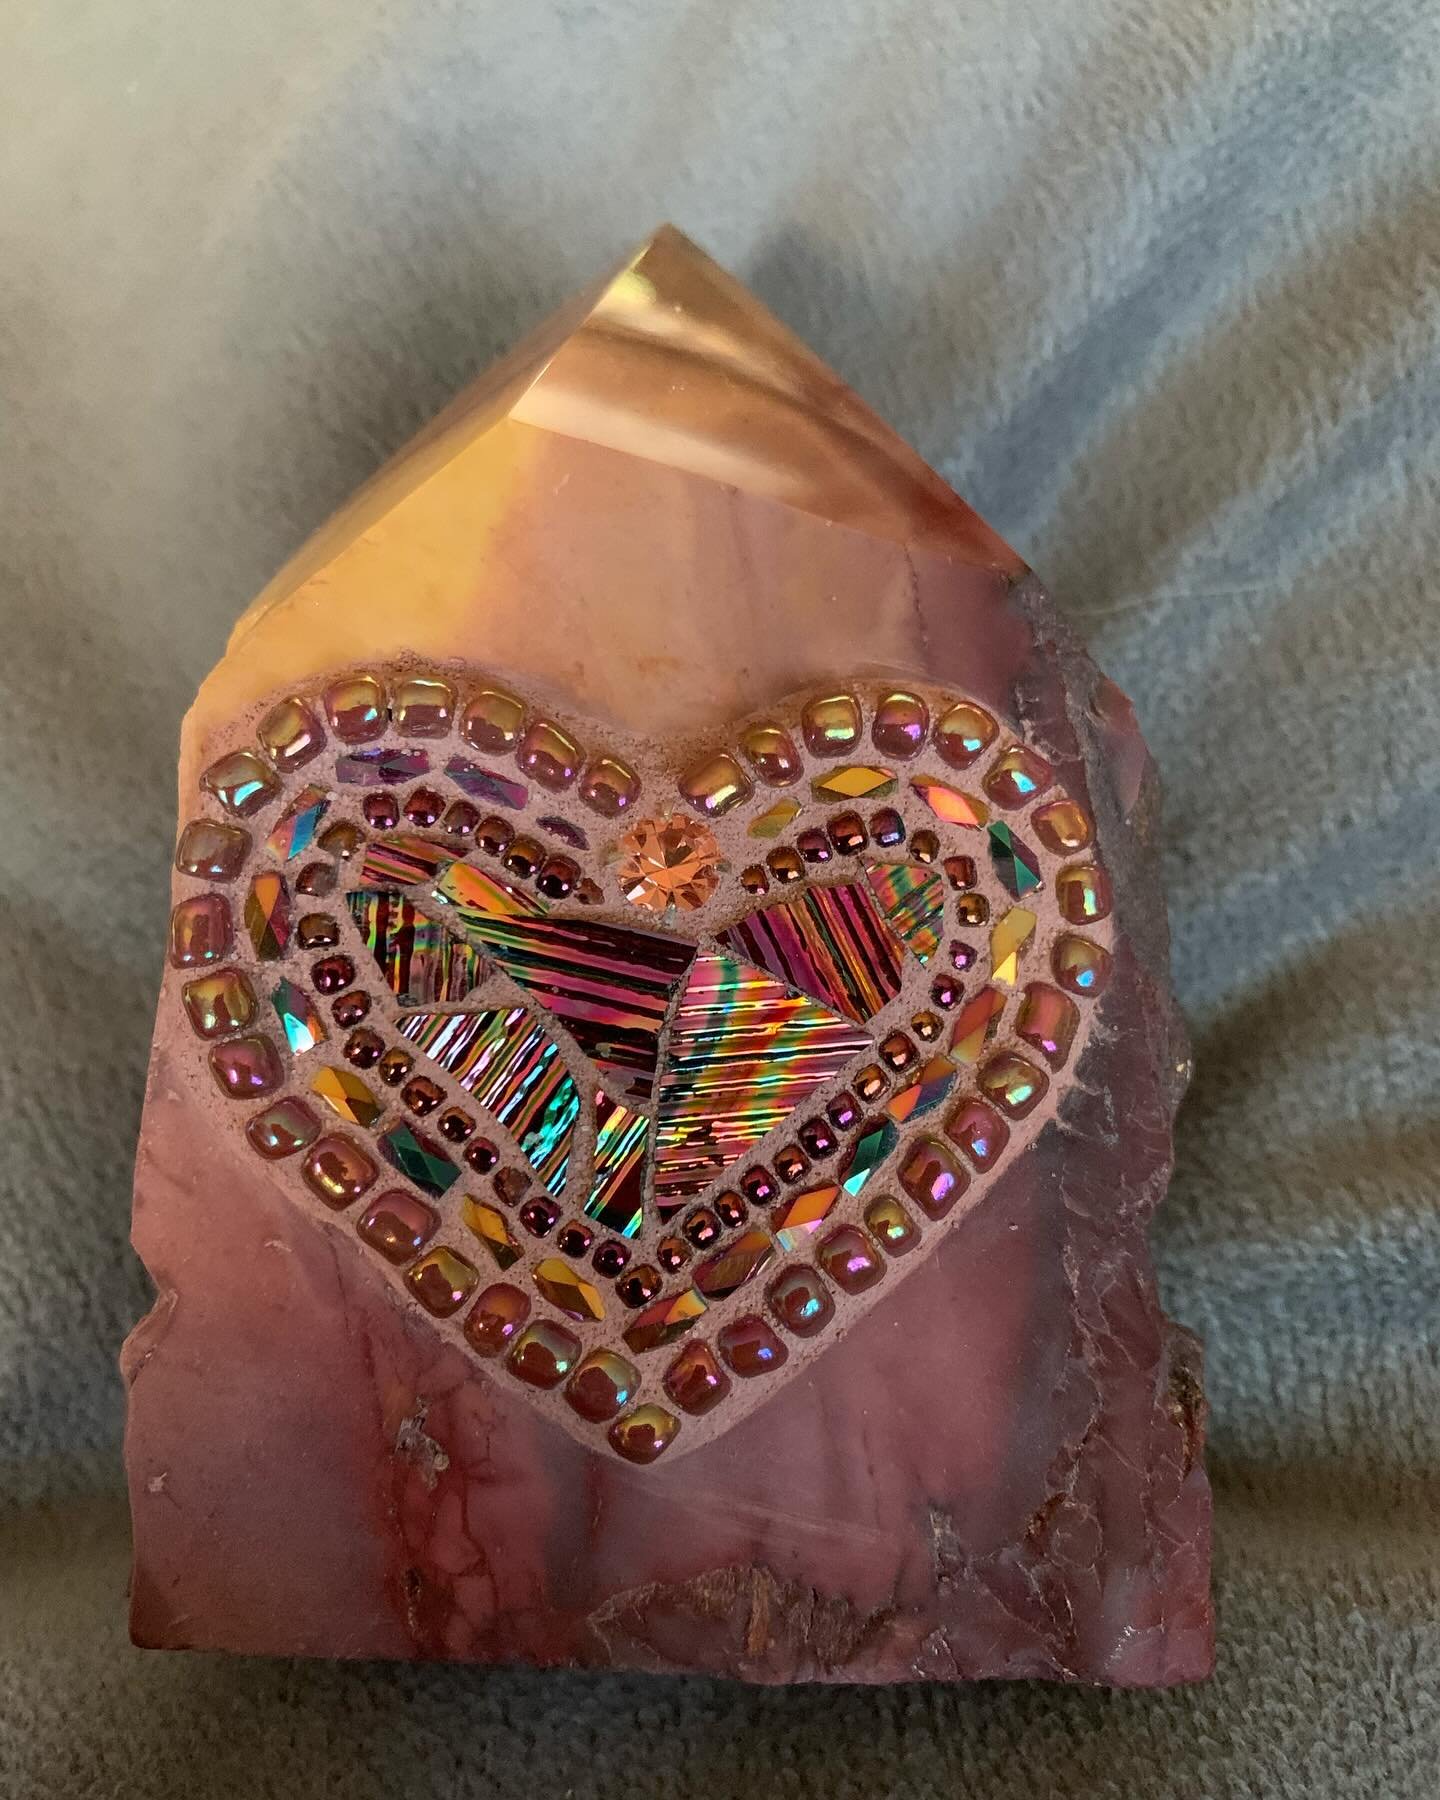 Jasper is a stone that is the supreme nurturing, supports times of stress, brings tranquility and wholeness with beautiful mosaic heart 💜 #tranquility #wholeness #nurturing #mosaicart #artthatheals #mindful #meditation #energy #healing #jasper